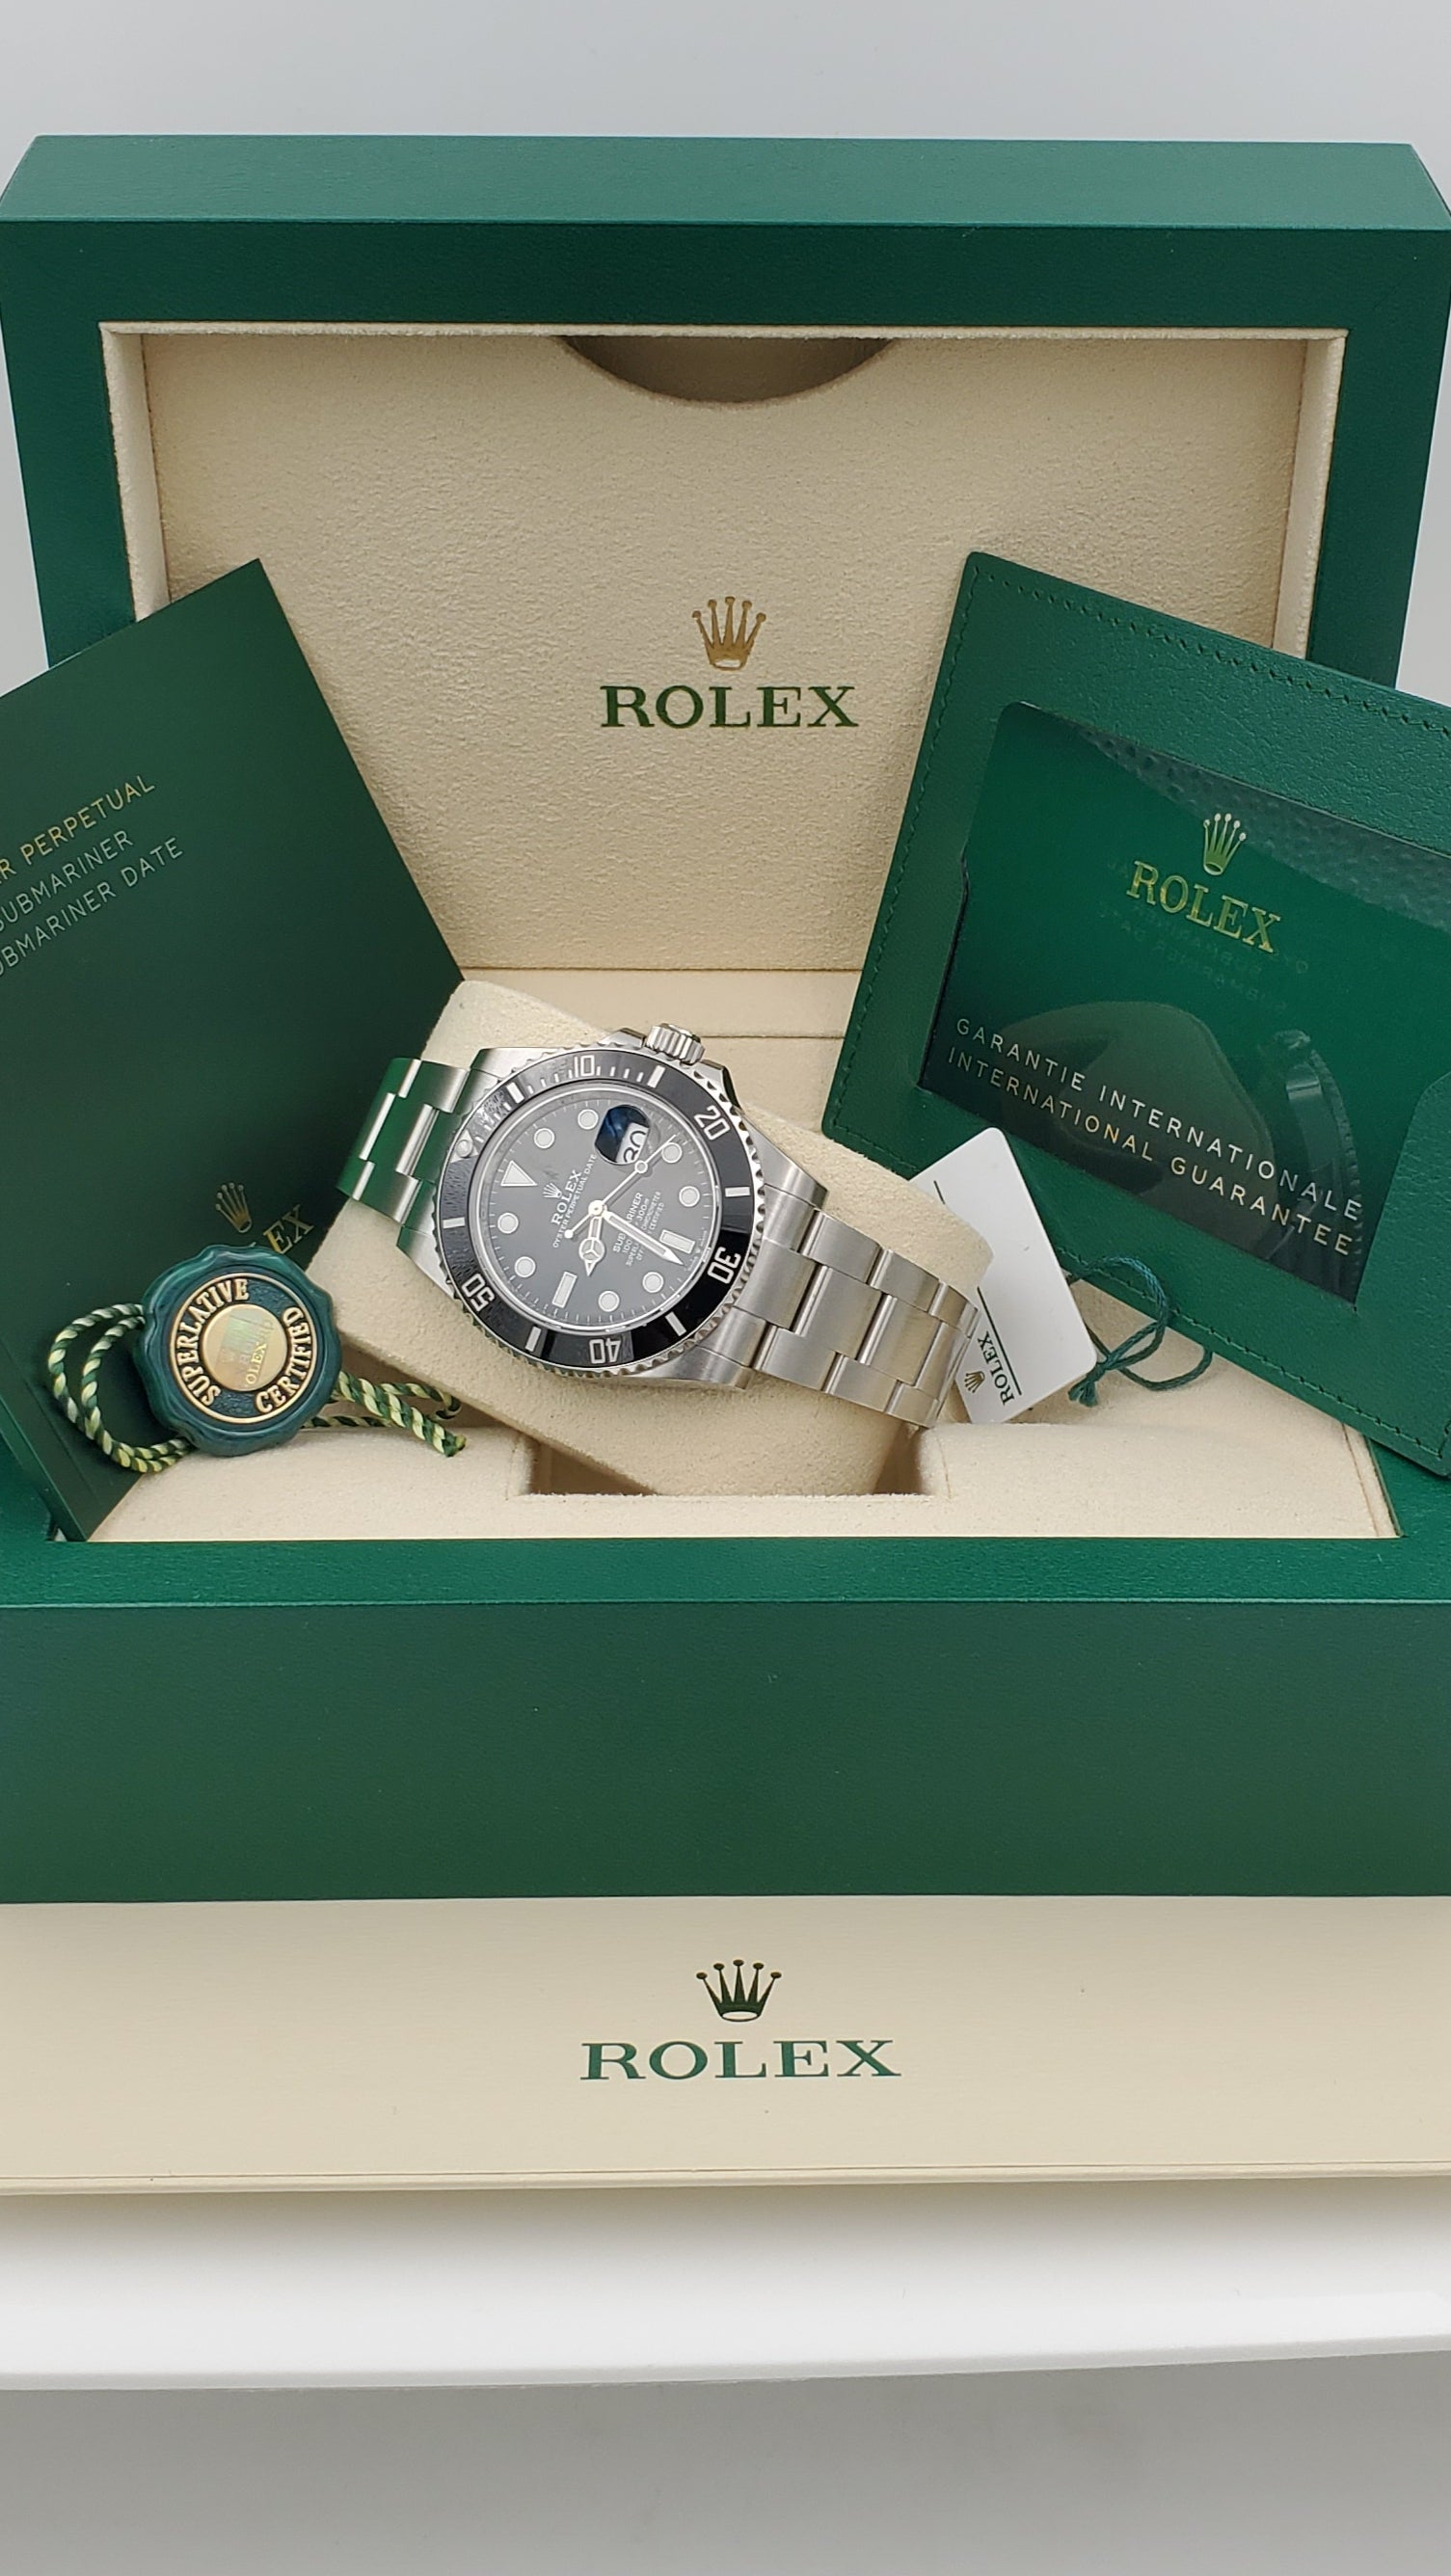 Men's Rolex 41mm Submariner Date Oyster Perpetual Stainless Steel Watch with Black Dial and Black Bezel. (NEW 126610LN)